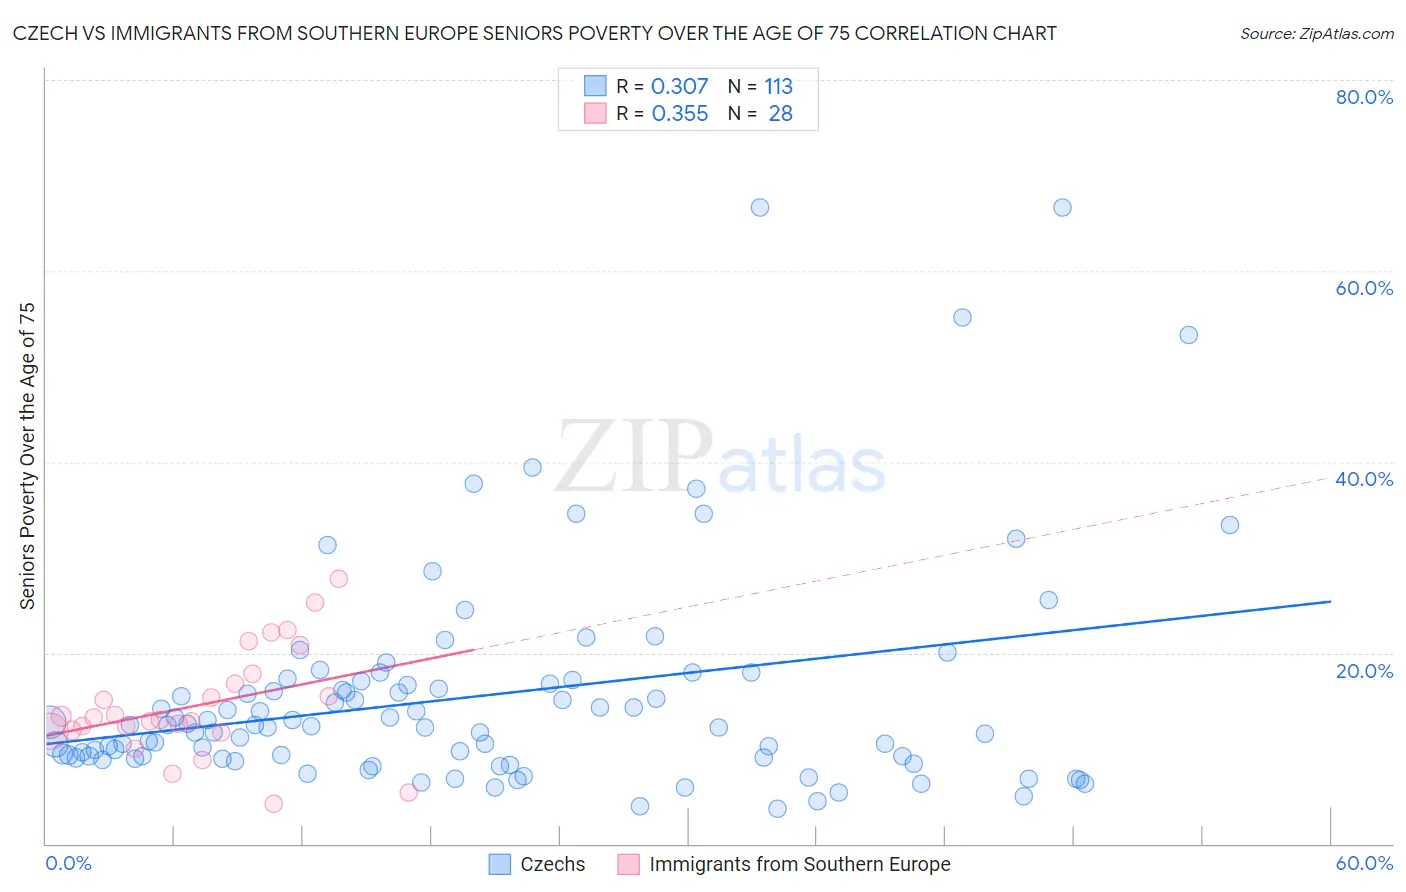 Czech vs Immigrants from Southern Europe Seniors Poverty Over the Age of 75